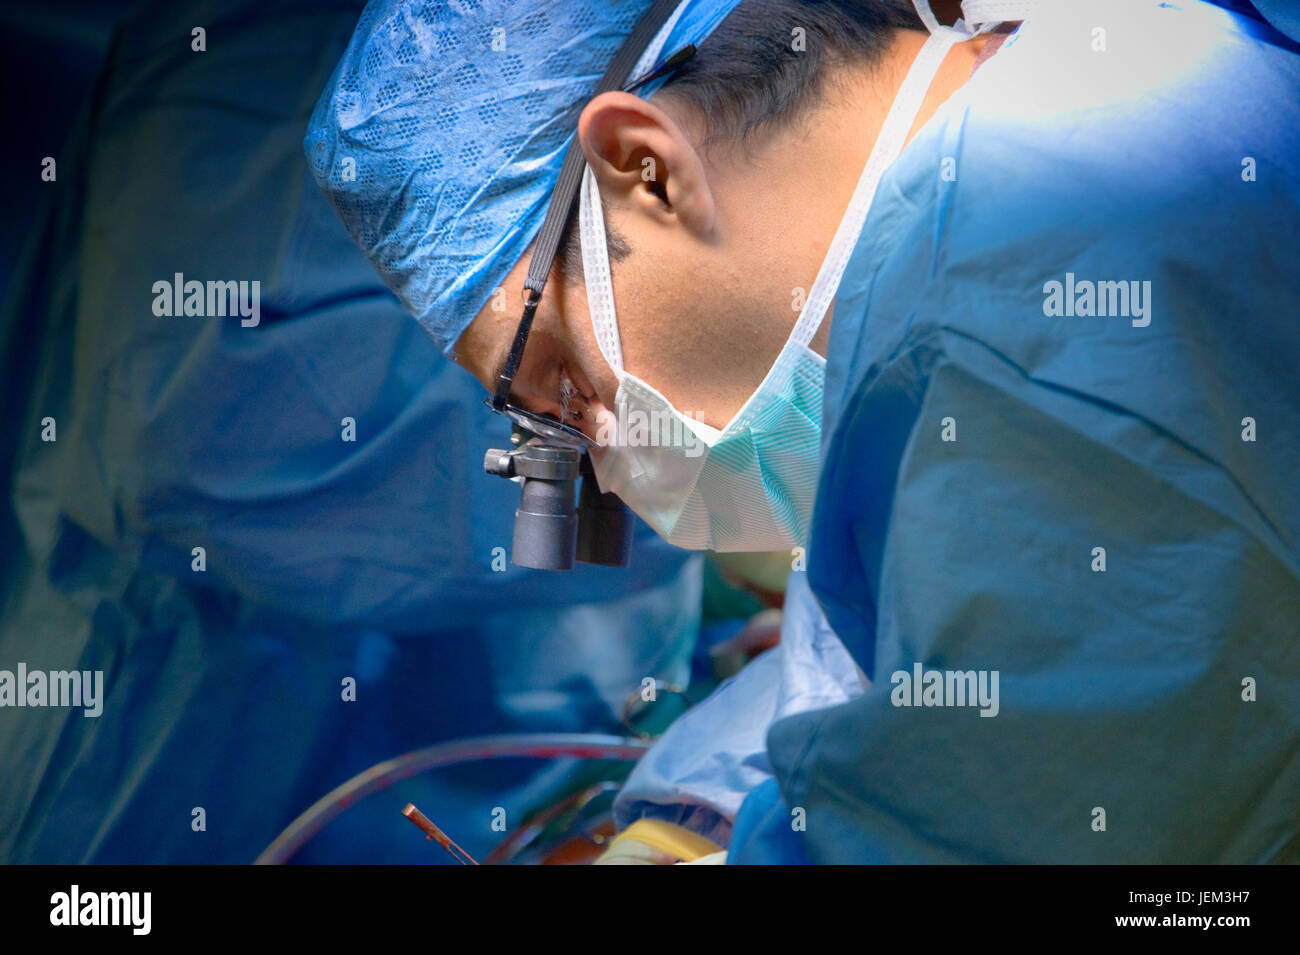 A surgeon operating on a patient wears surgical binocular loupes which magnify the working area and increase precision. Stock Photo